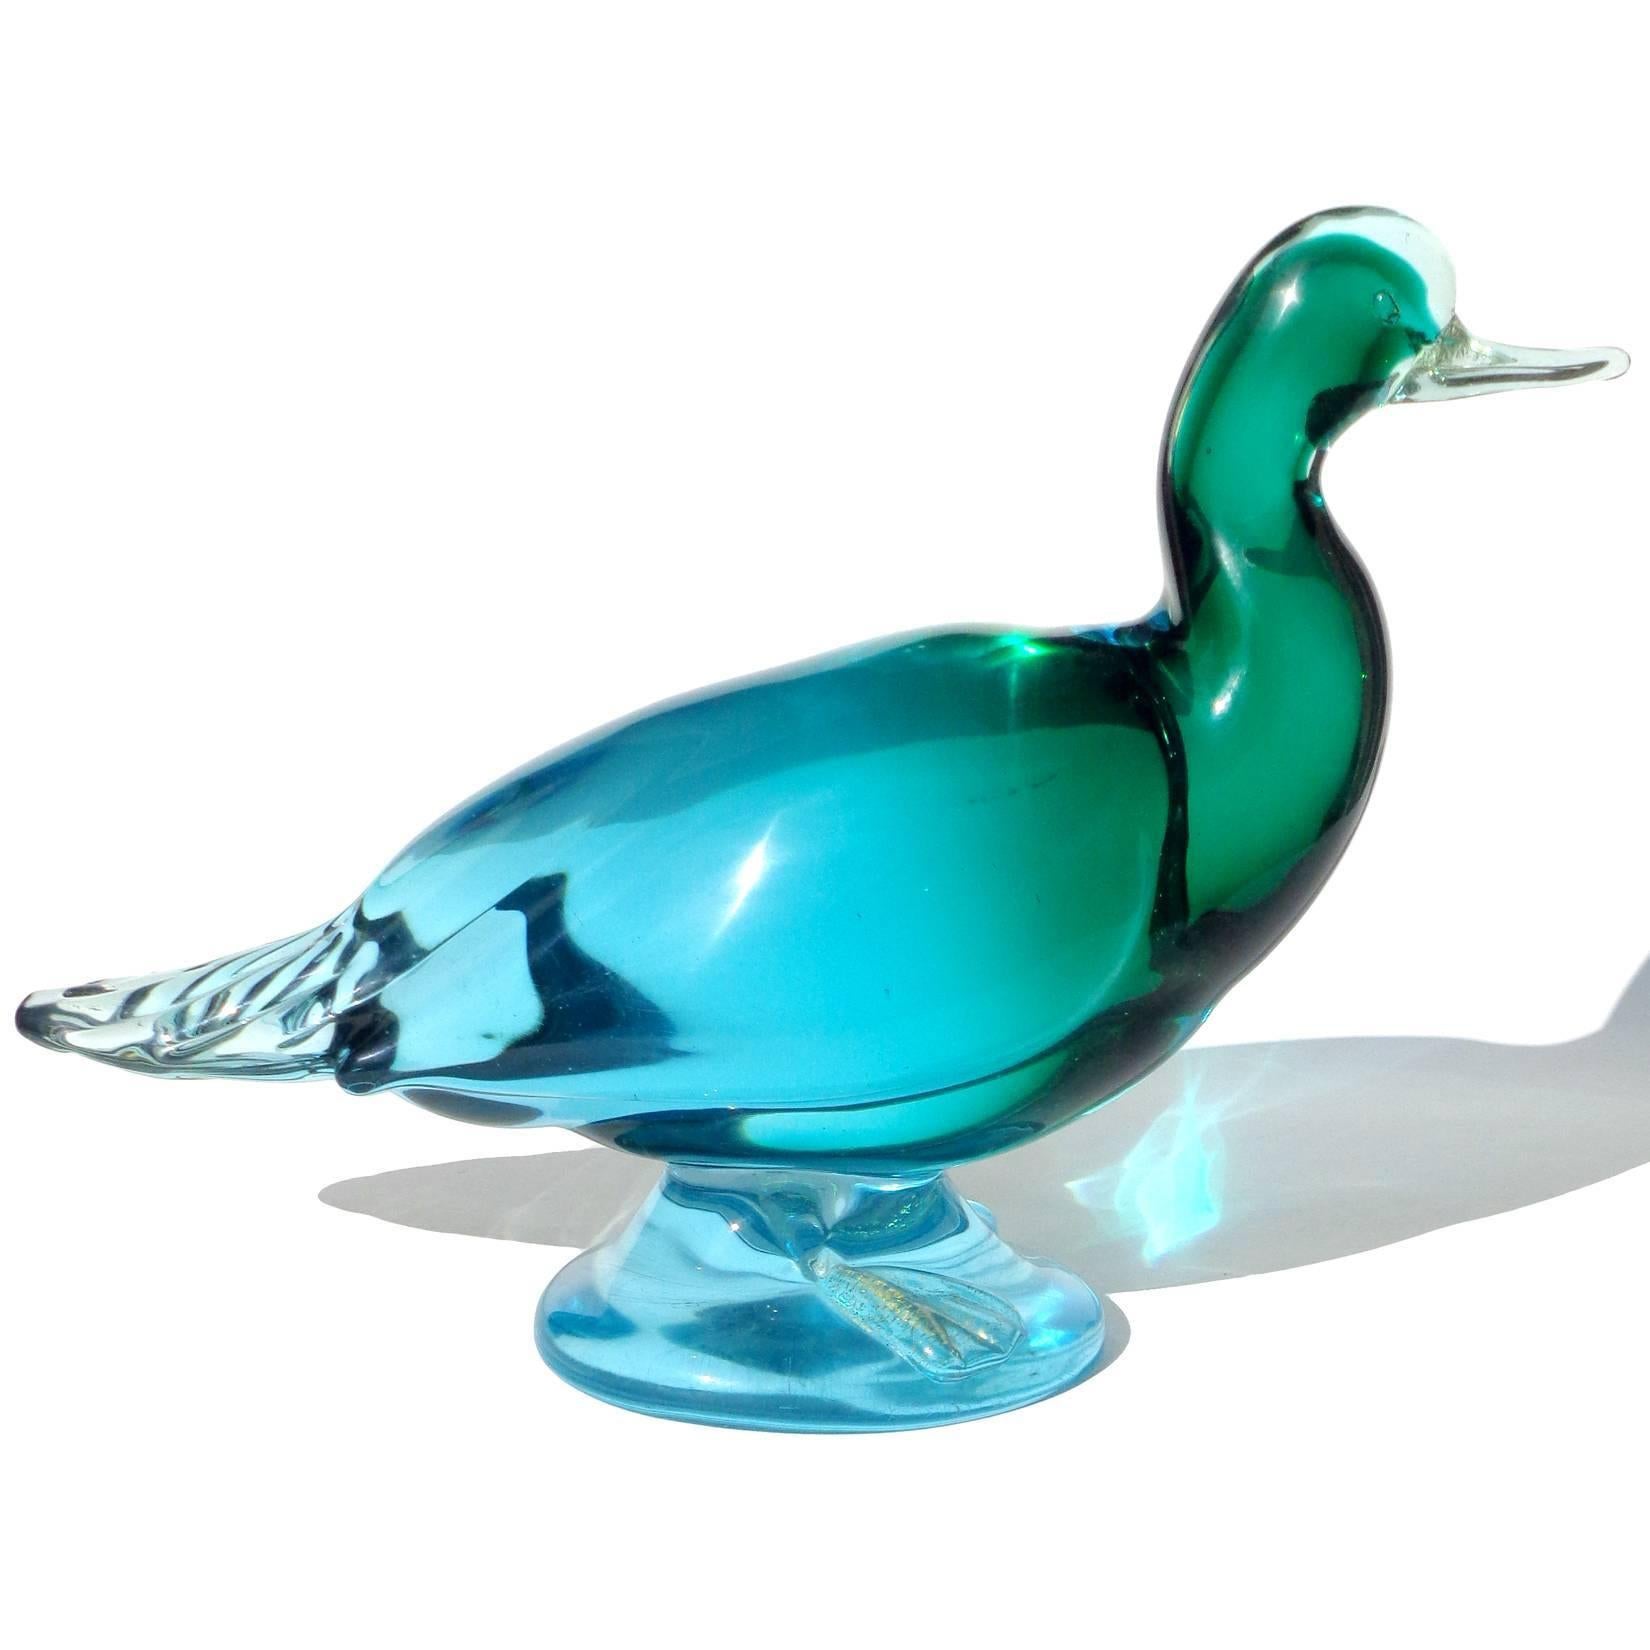 Beautiful and very large, vintage Murano hand blown Sommerso blue and green with gold flecks accents, art glass duck sculpture. Can be used as a centerpiece on any table. Mid-century era. Very heavy piece, and measures 12